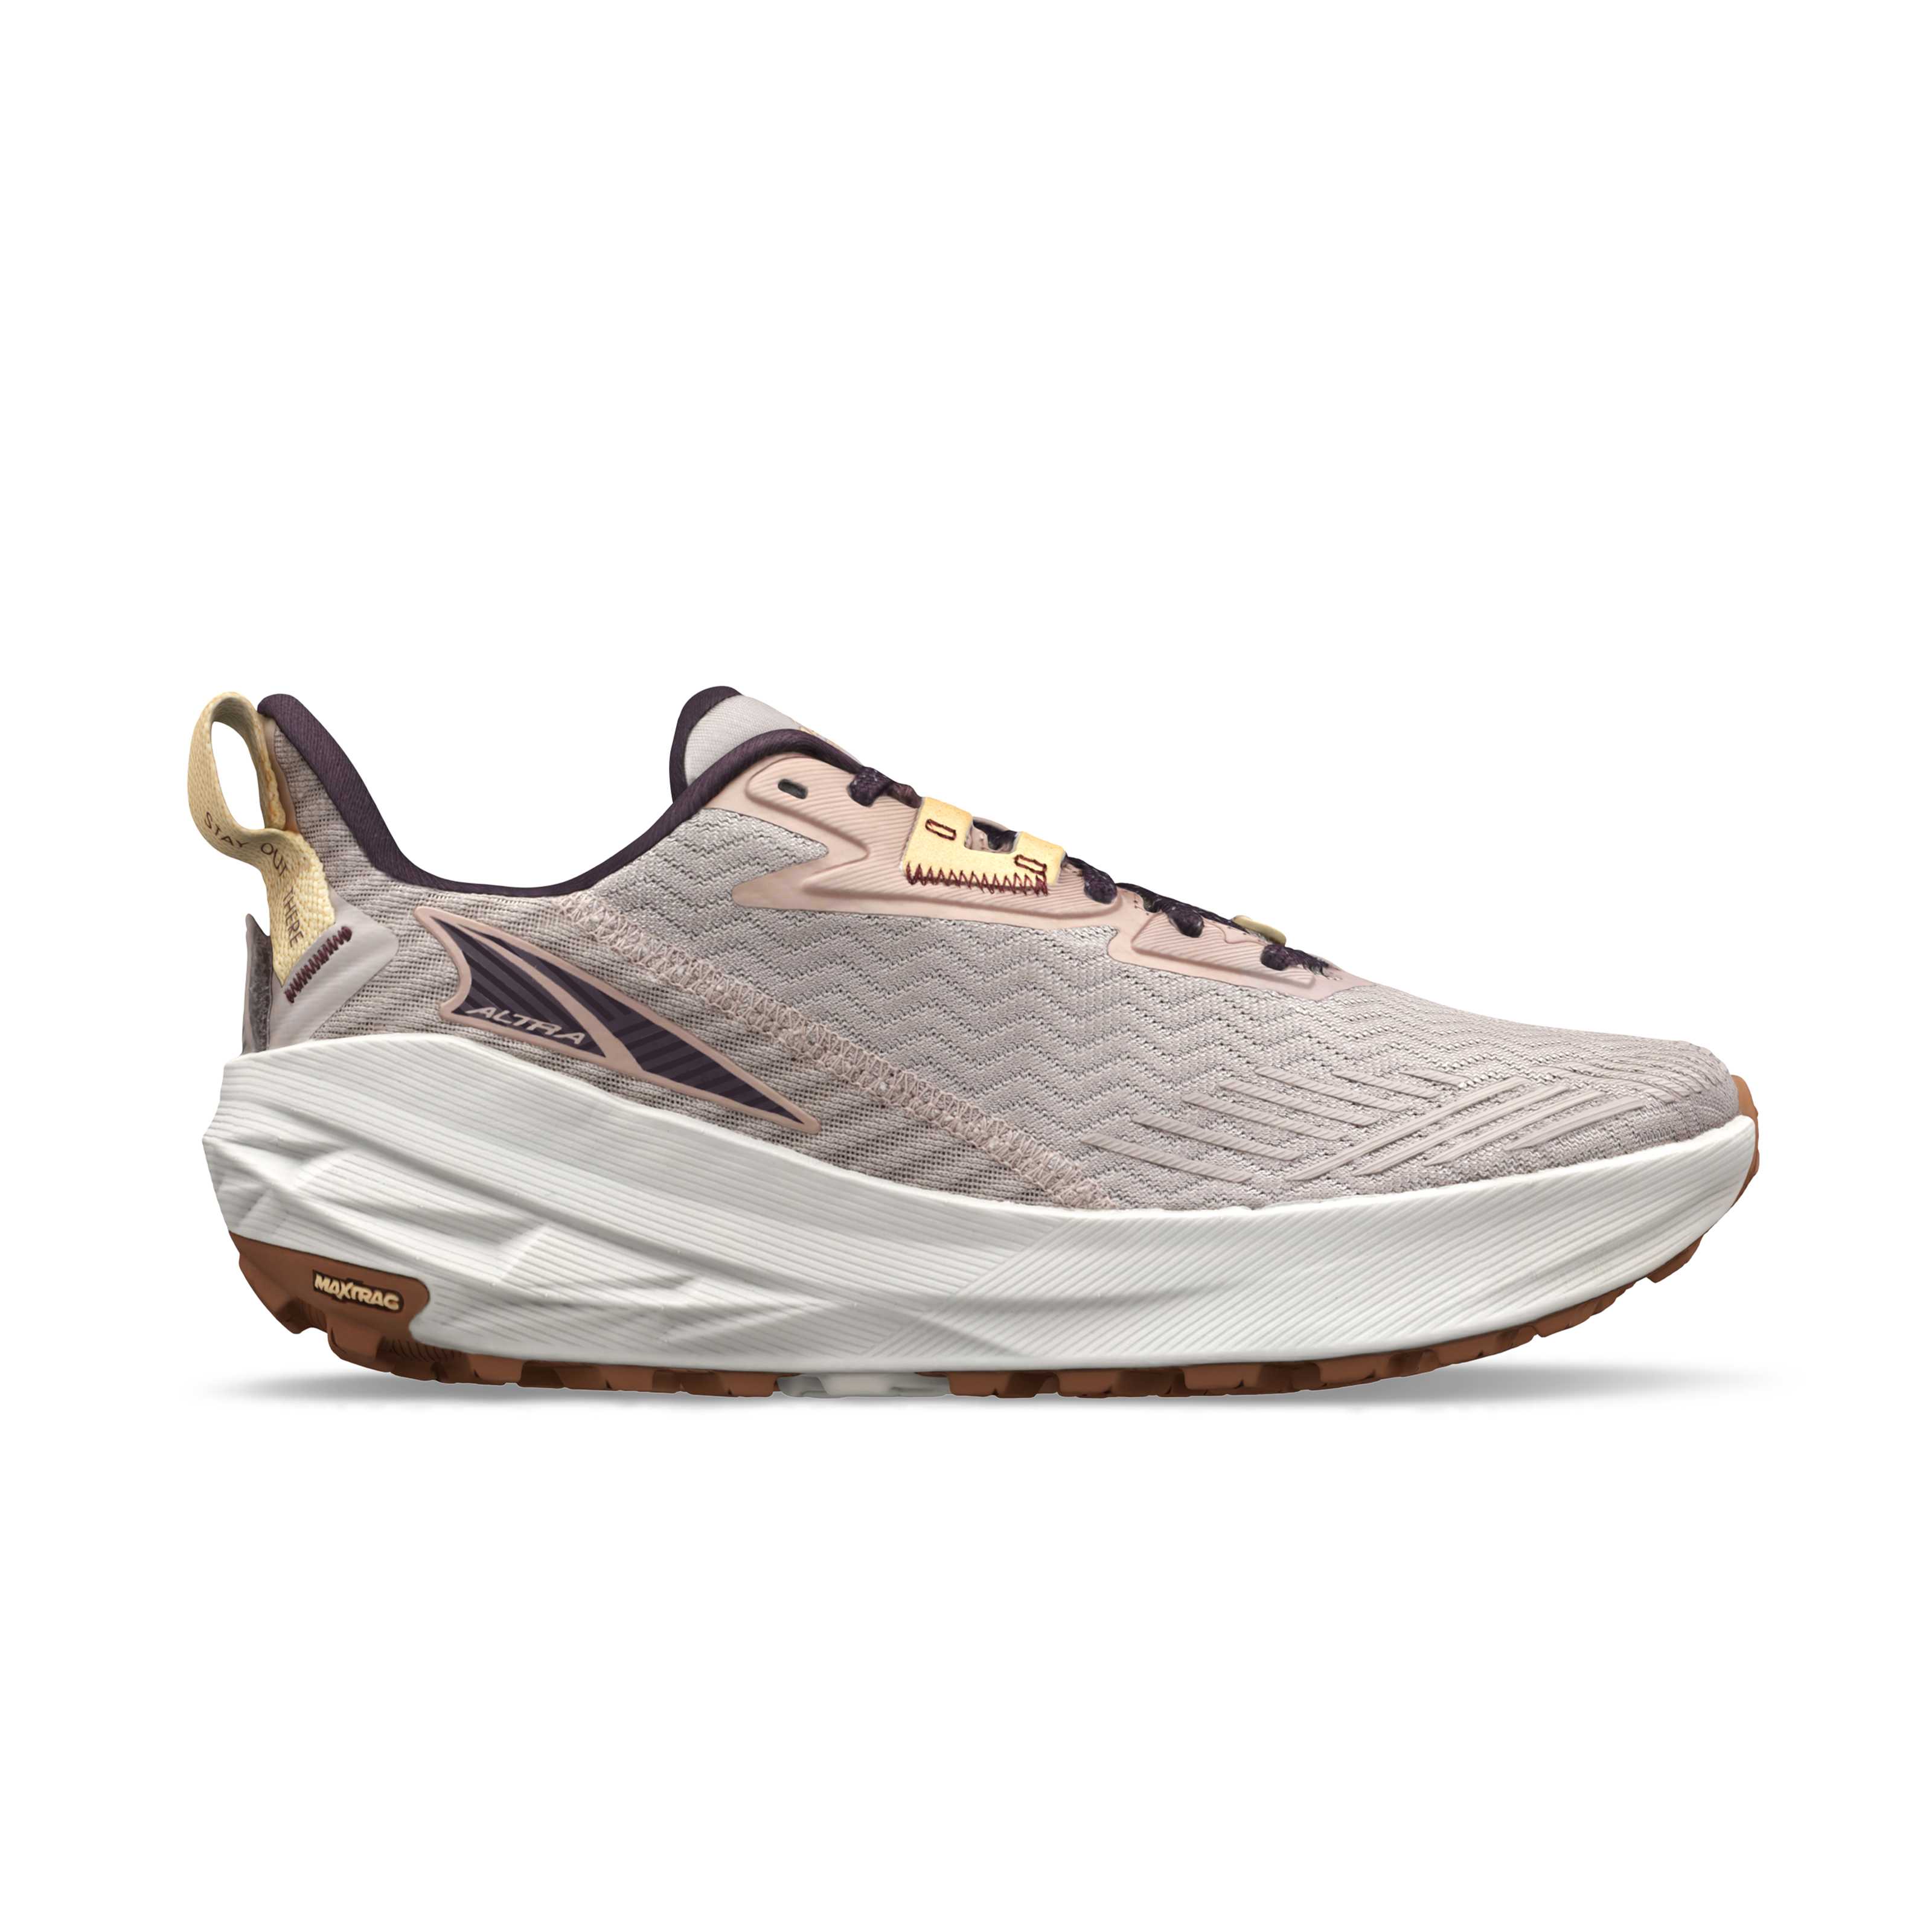 ALTRA WOMEN'S EXPERIENCE WILD - B- 923 TAUPE 5.0